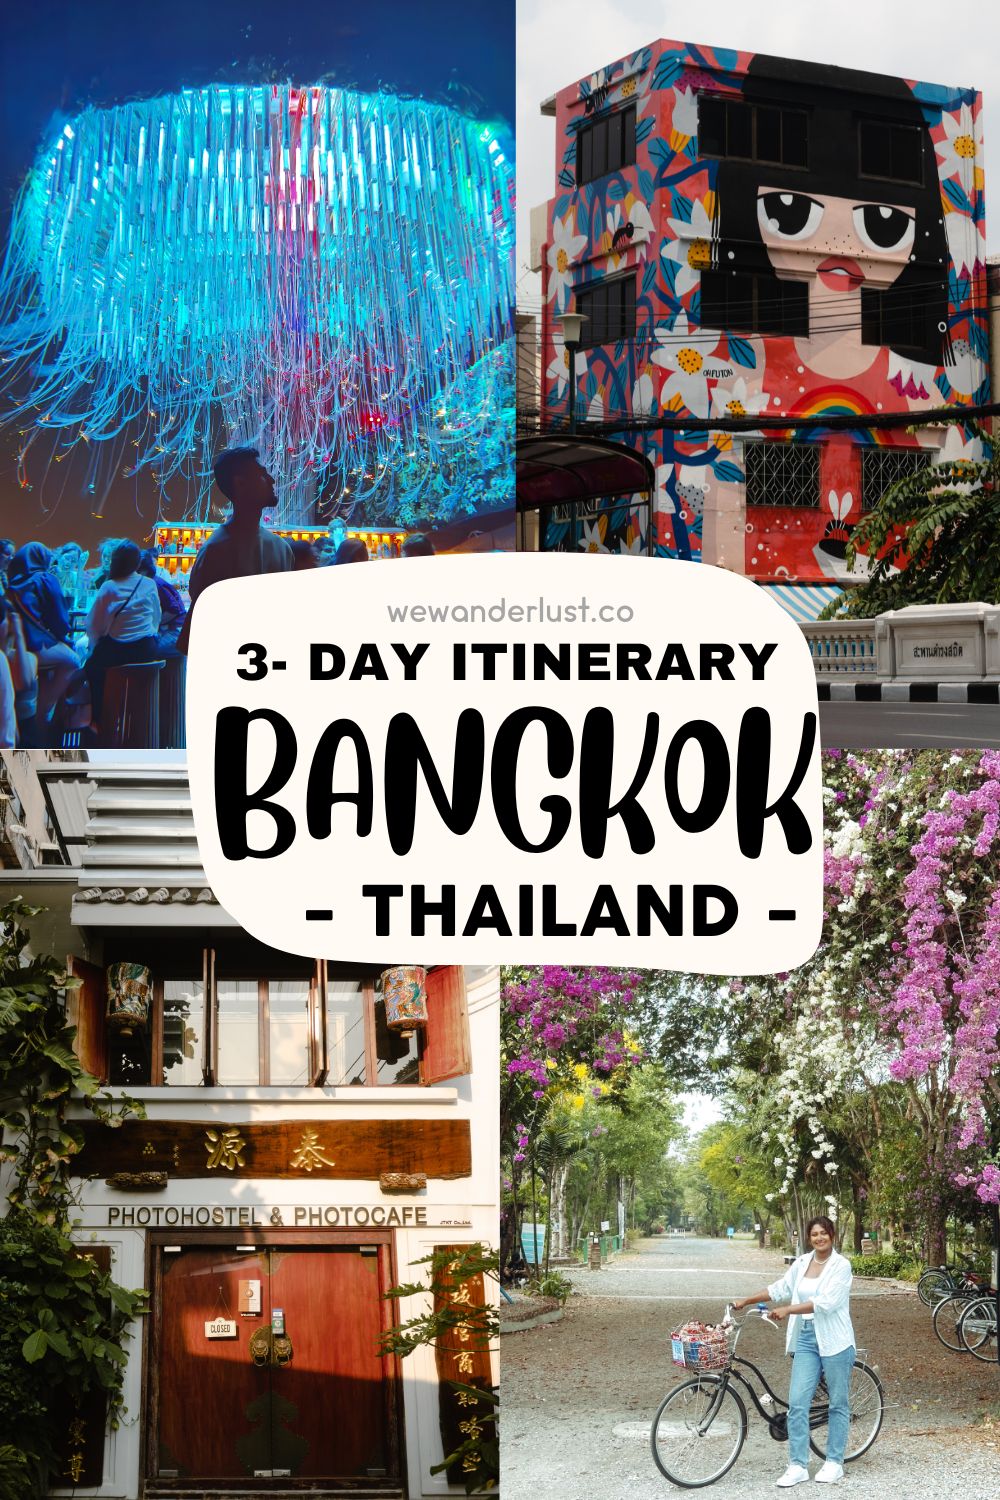 thailand travel guide
